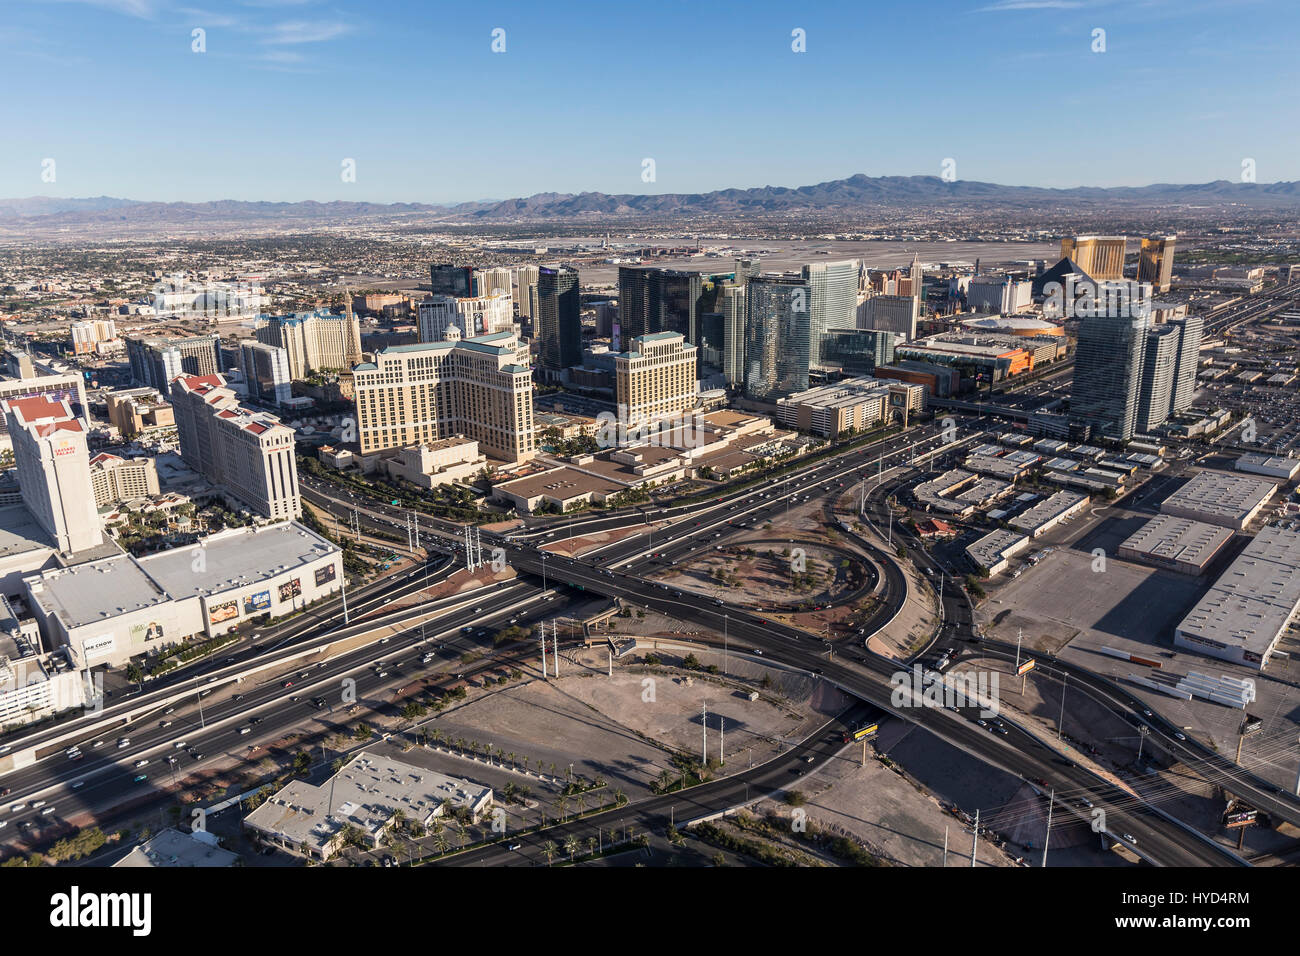 Las Vegas, Nevada, USA - March 13, 2017:  Aerial view of casino resorts near Flamingo Ave and Las Vegas Blvd in Southern Nevada. Stock Photo